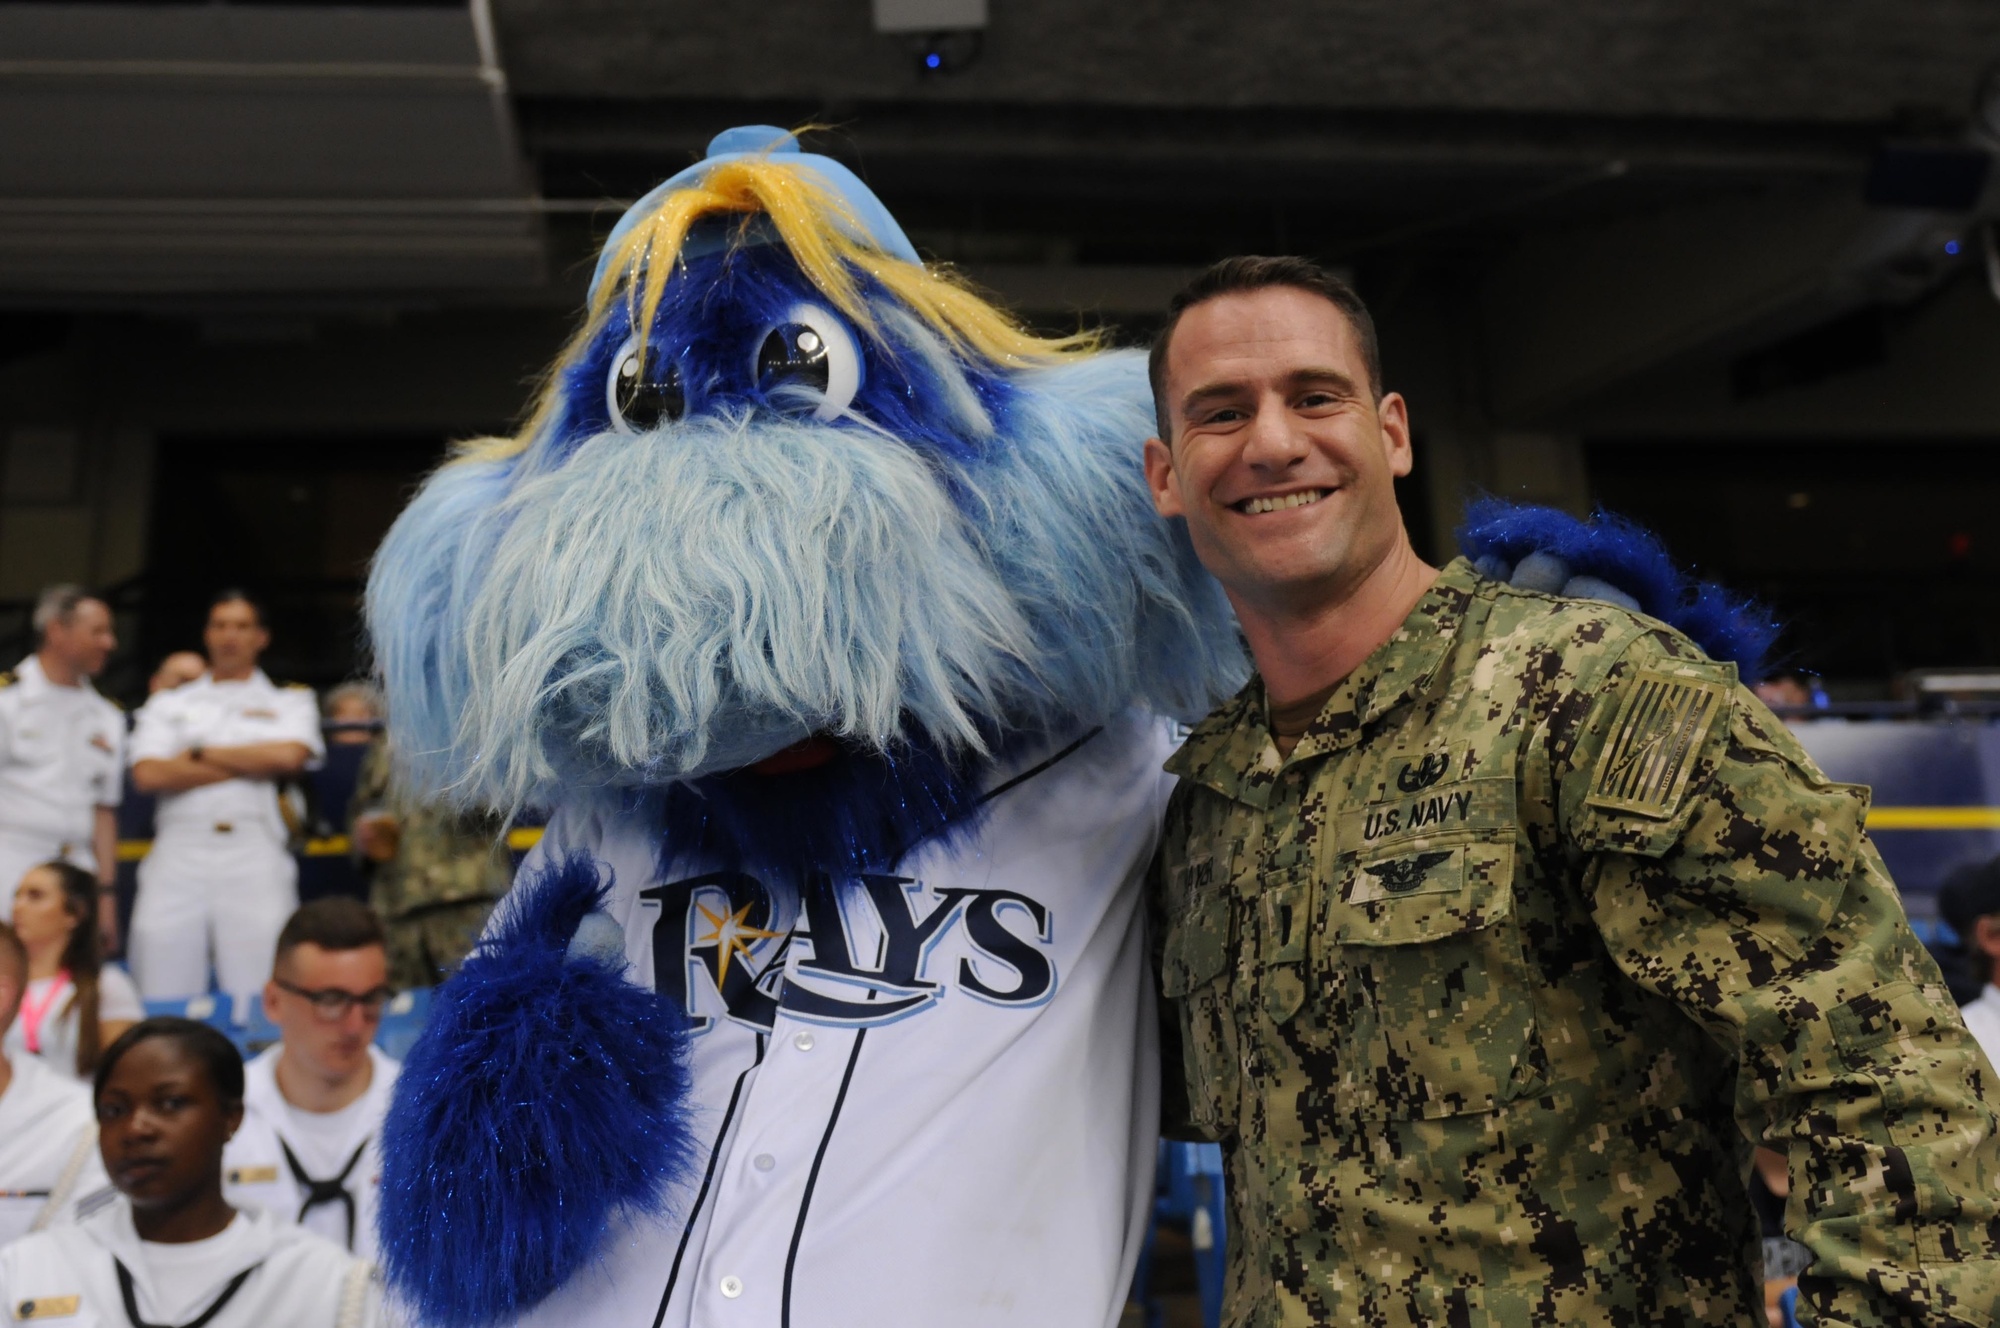 I don't understand the Tampa Bay Rays Mascots